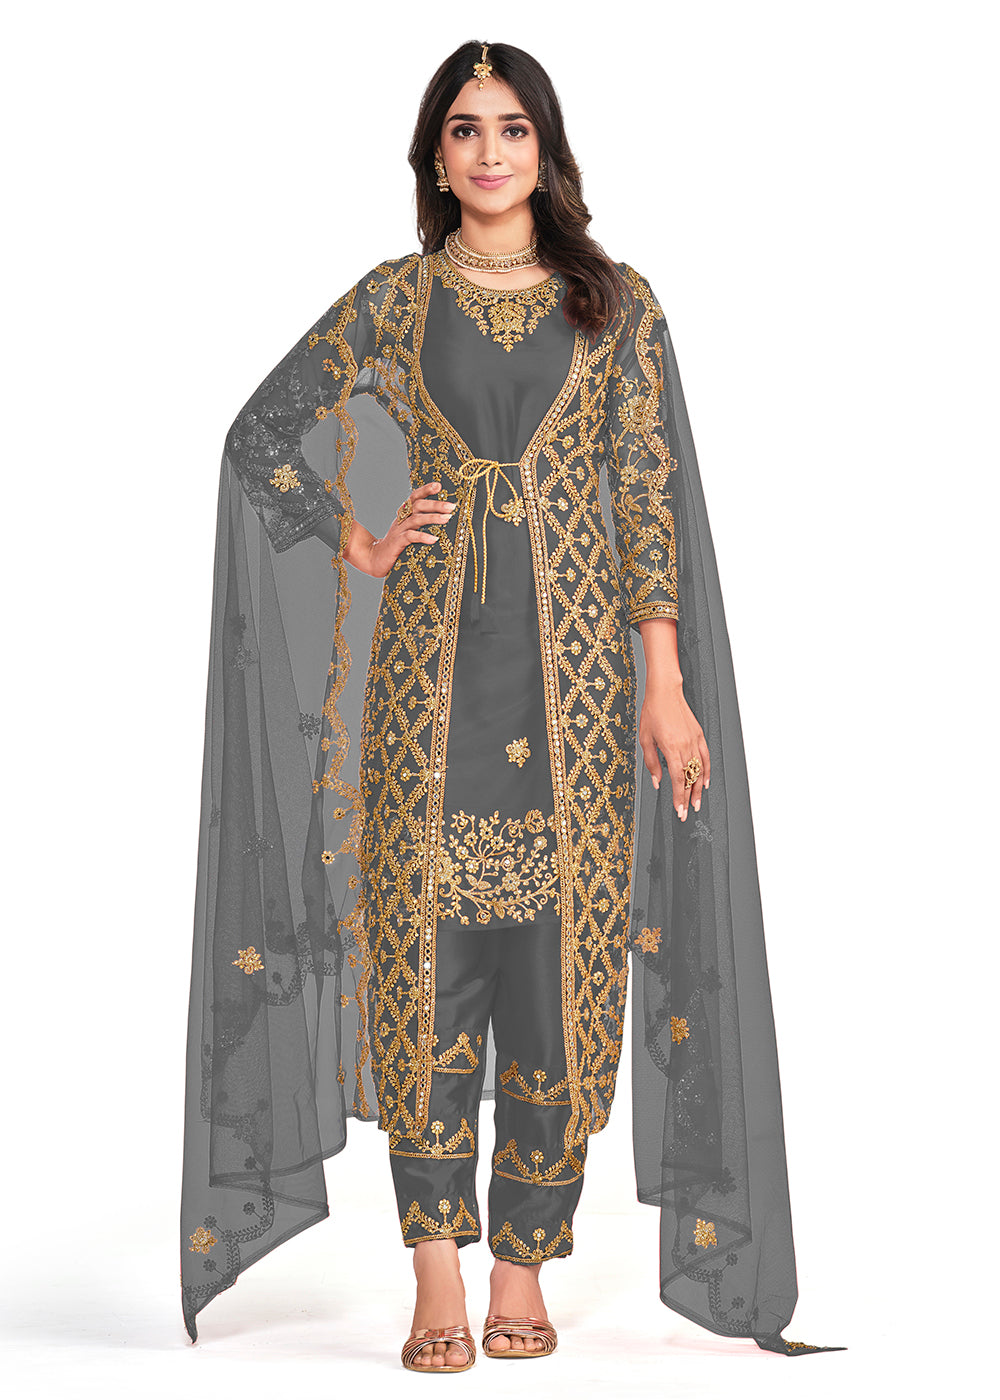 Buy Now Koti Style Coveted Grey Patterned Festive Salwar Suit Online in USA, UK, Canada, Germany, Australia & Worldwide at Empress Clothing.